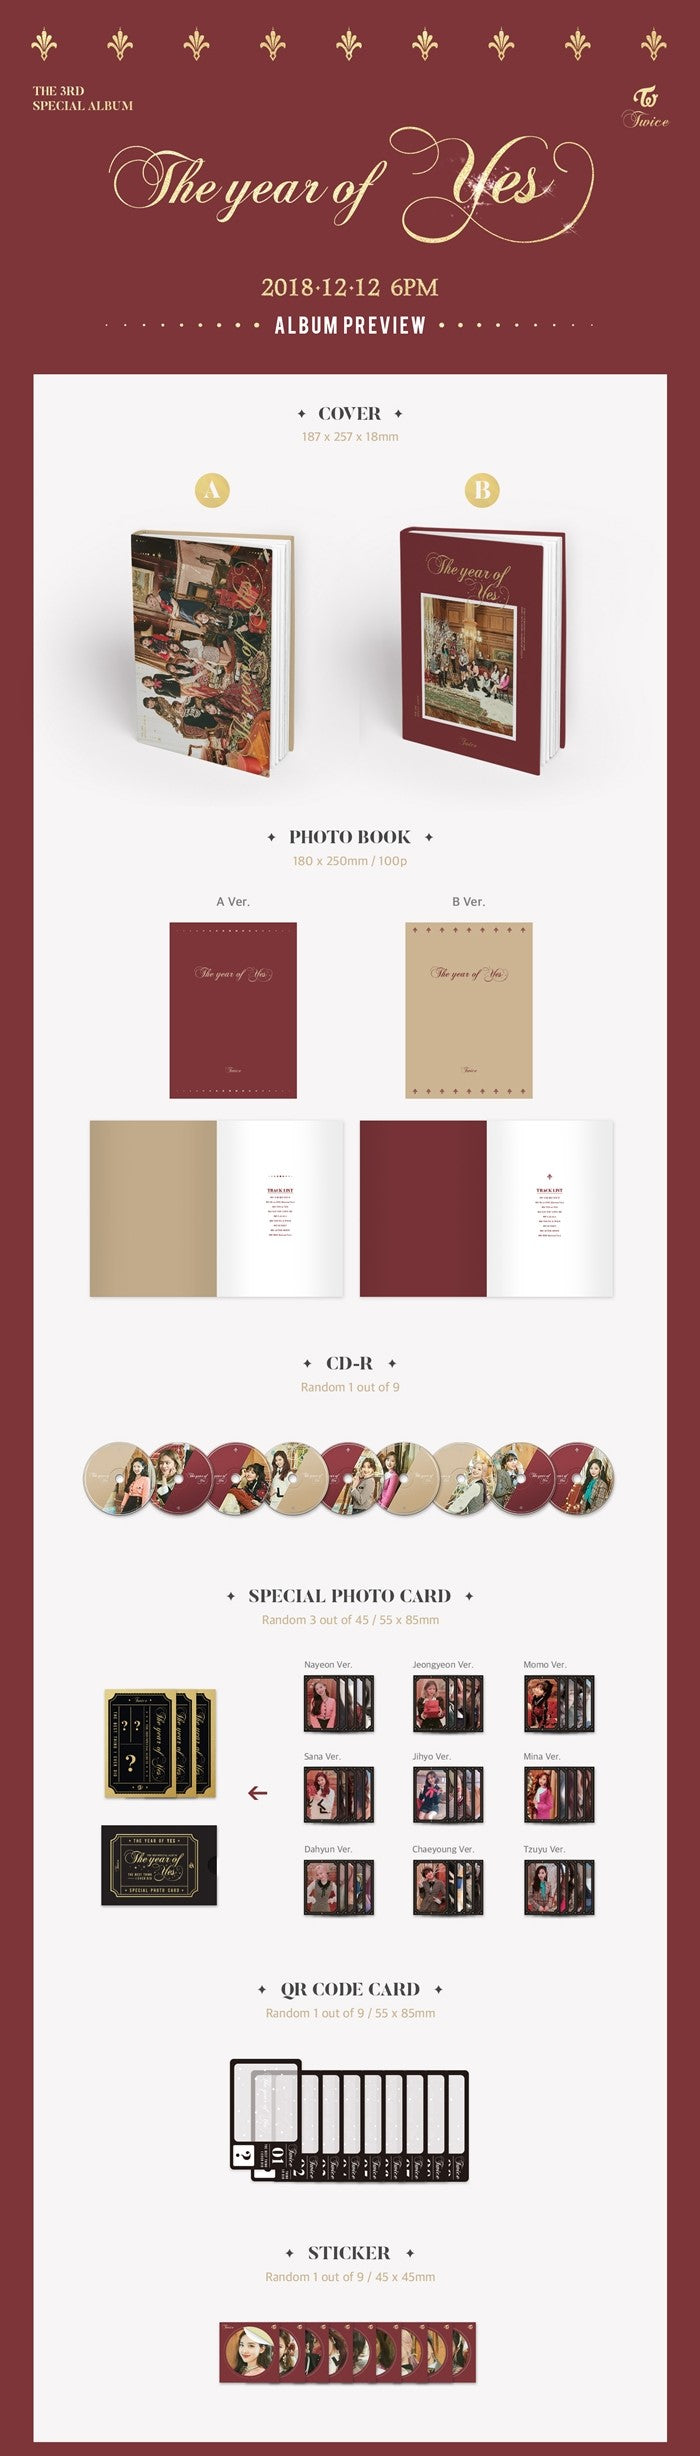 K-pop CD Twice - 3rd Special Album ‘The year of yes’